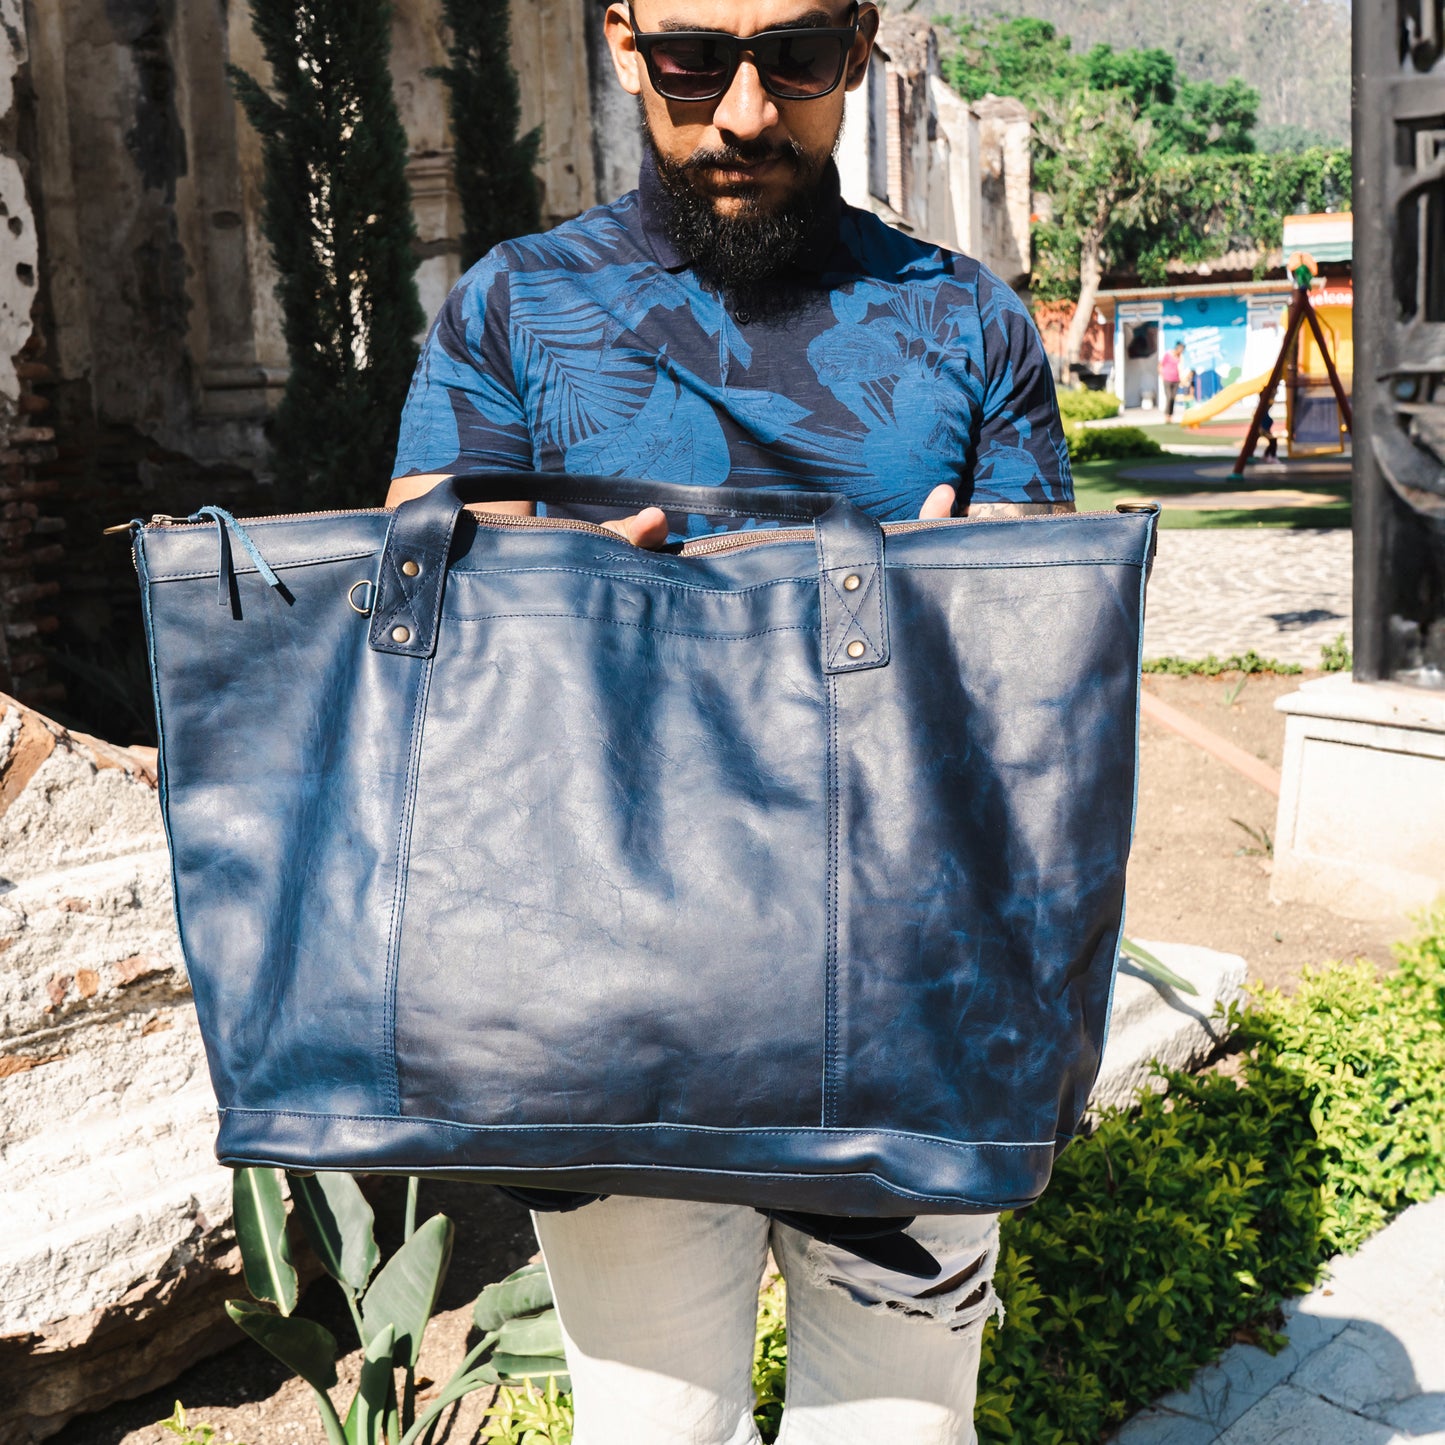 THE PERFECT WEEKENDER - FULL LEATHER - NAVY